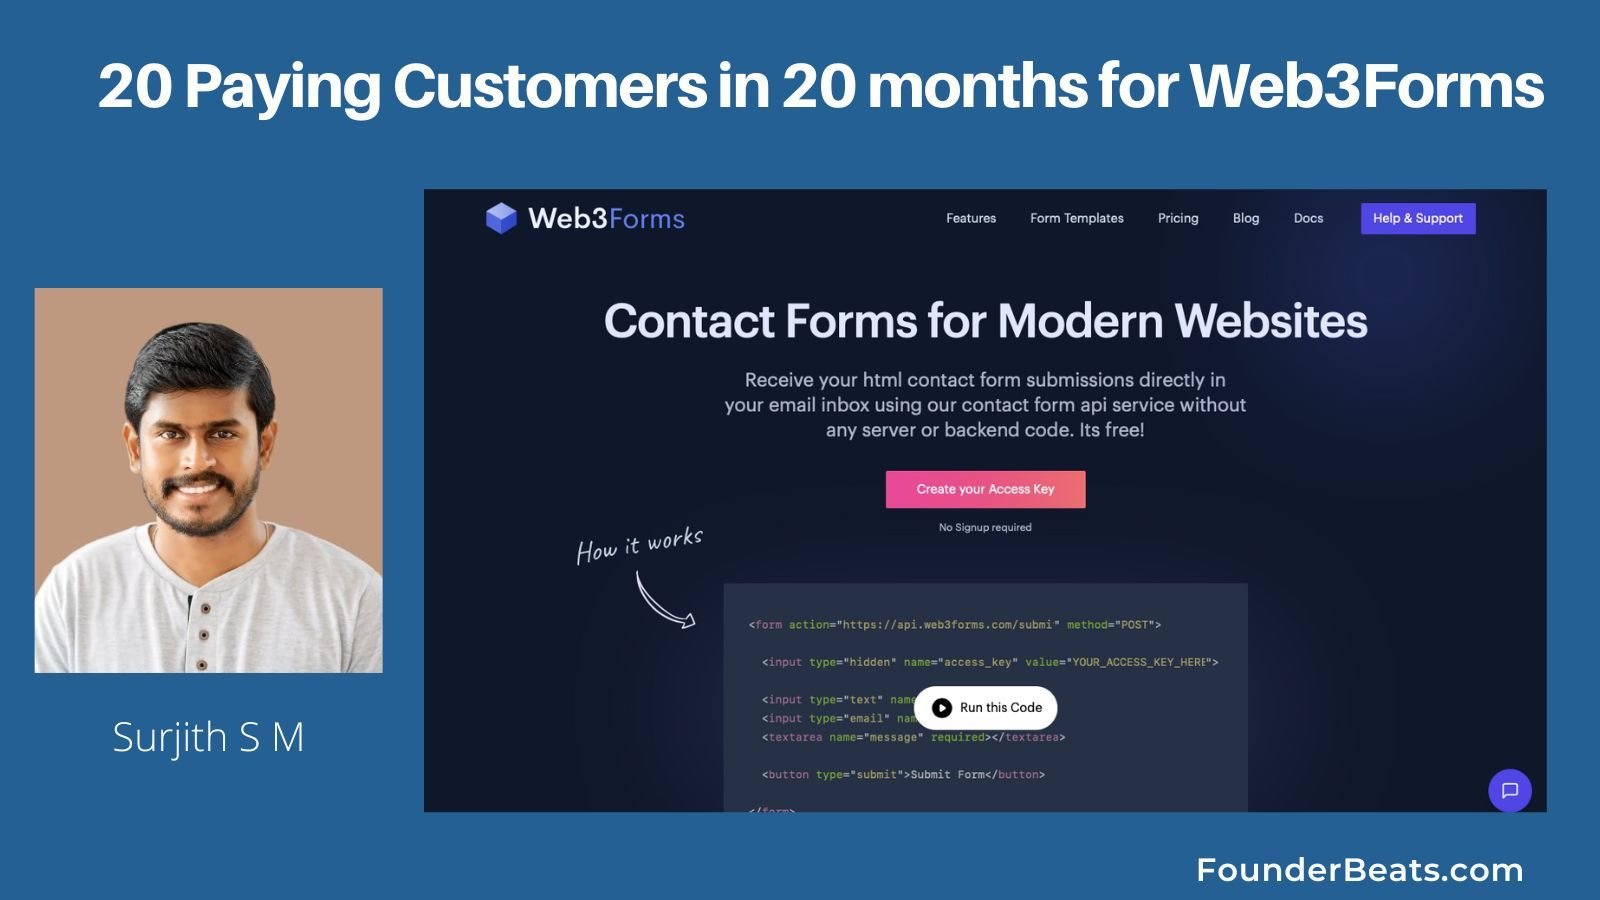 Surjith Acquires 20 Paying Customers in 20 months for Web3Forms